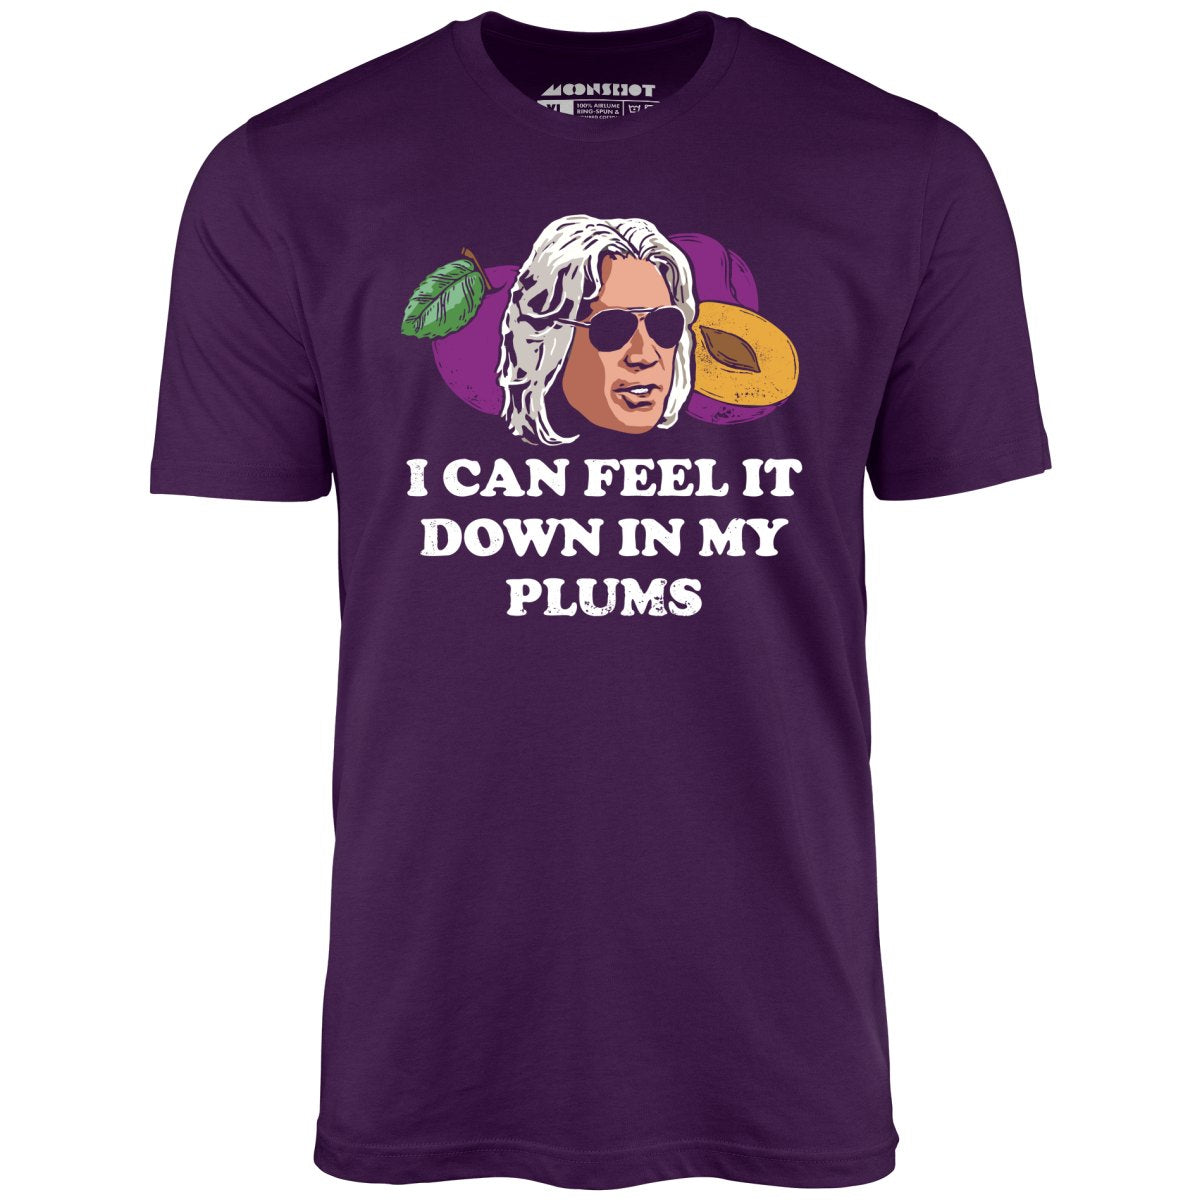 I Can Feel it Down in My Plums - Unisex T-Shirt